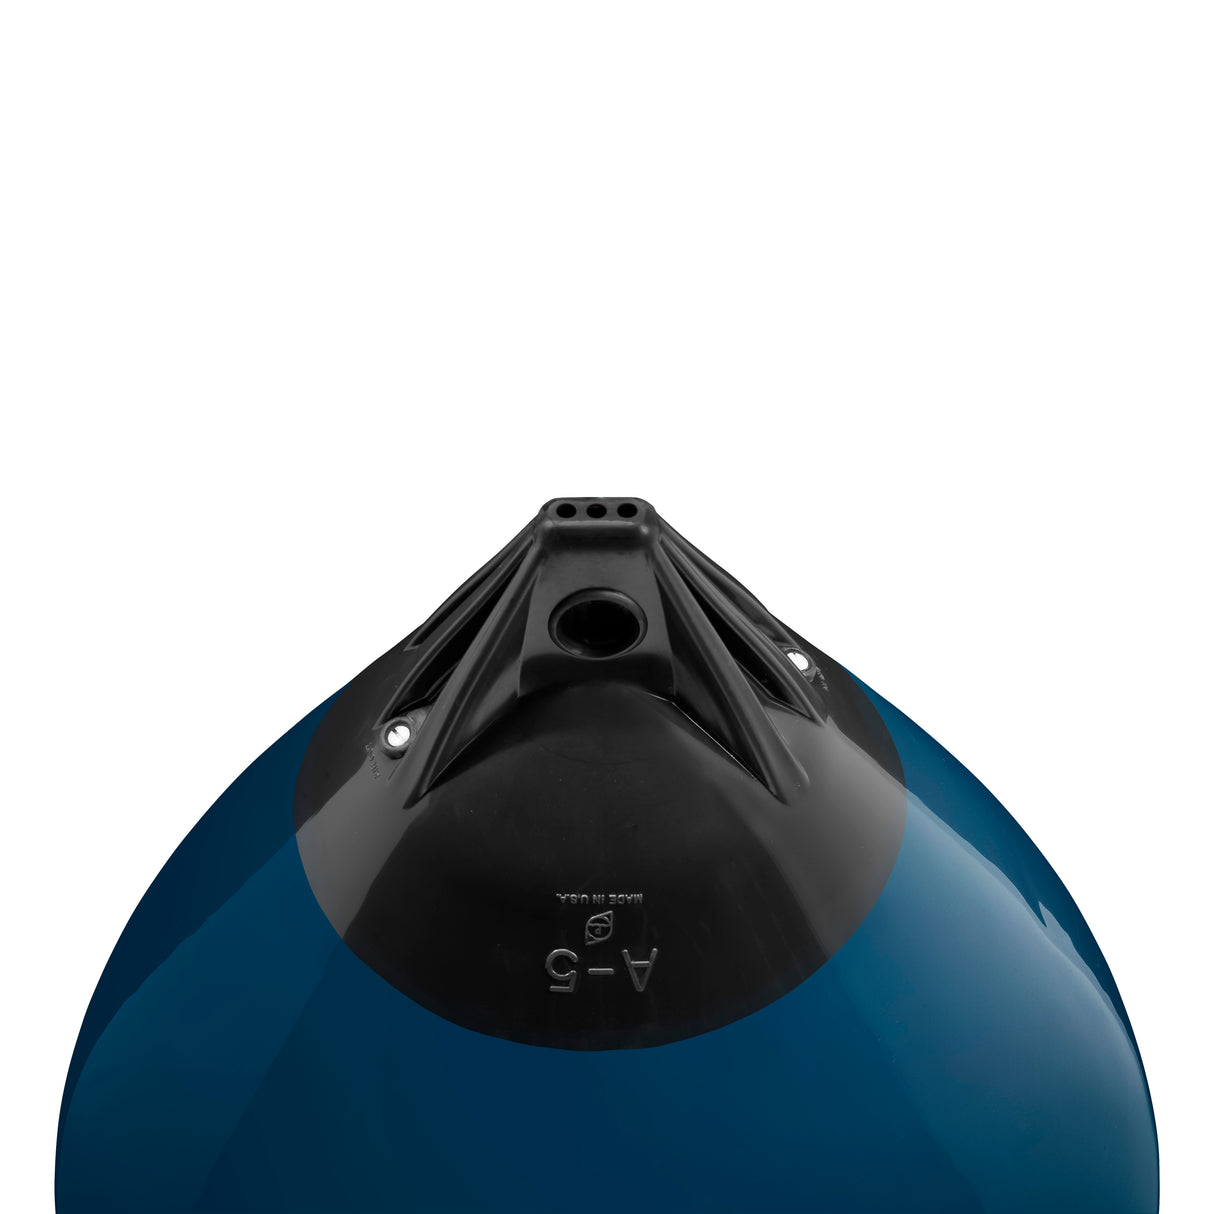 Catalina Blue buoy with Black-Top, Polyform A-5 angled shot